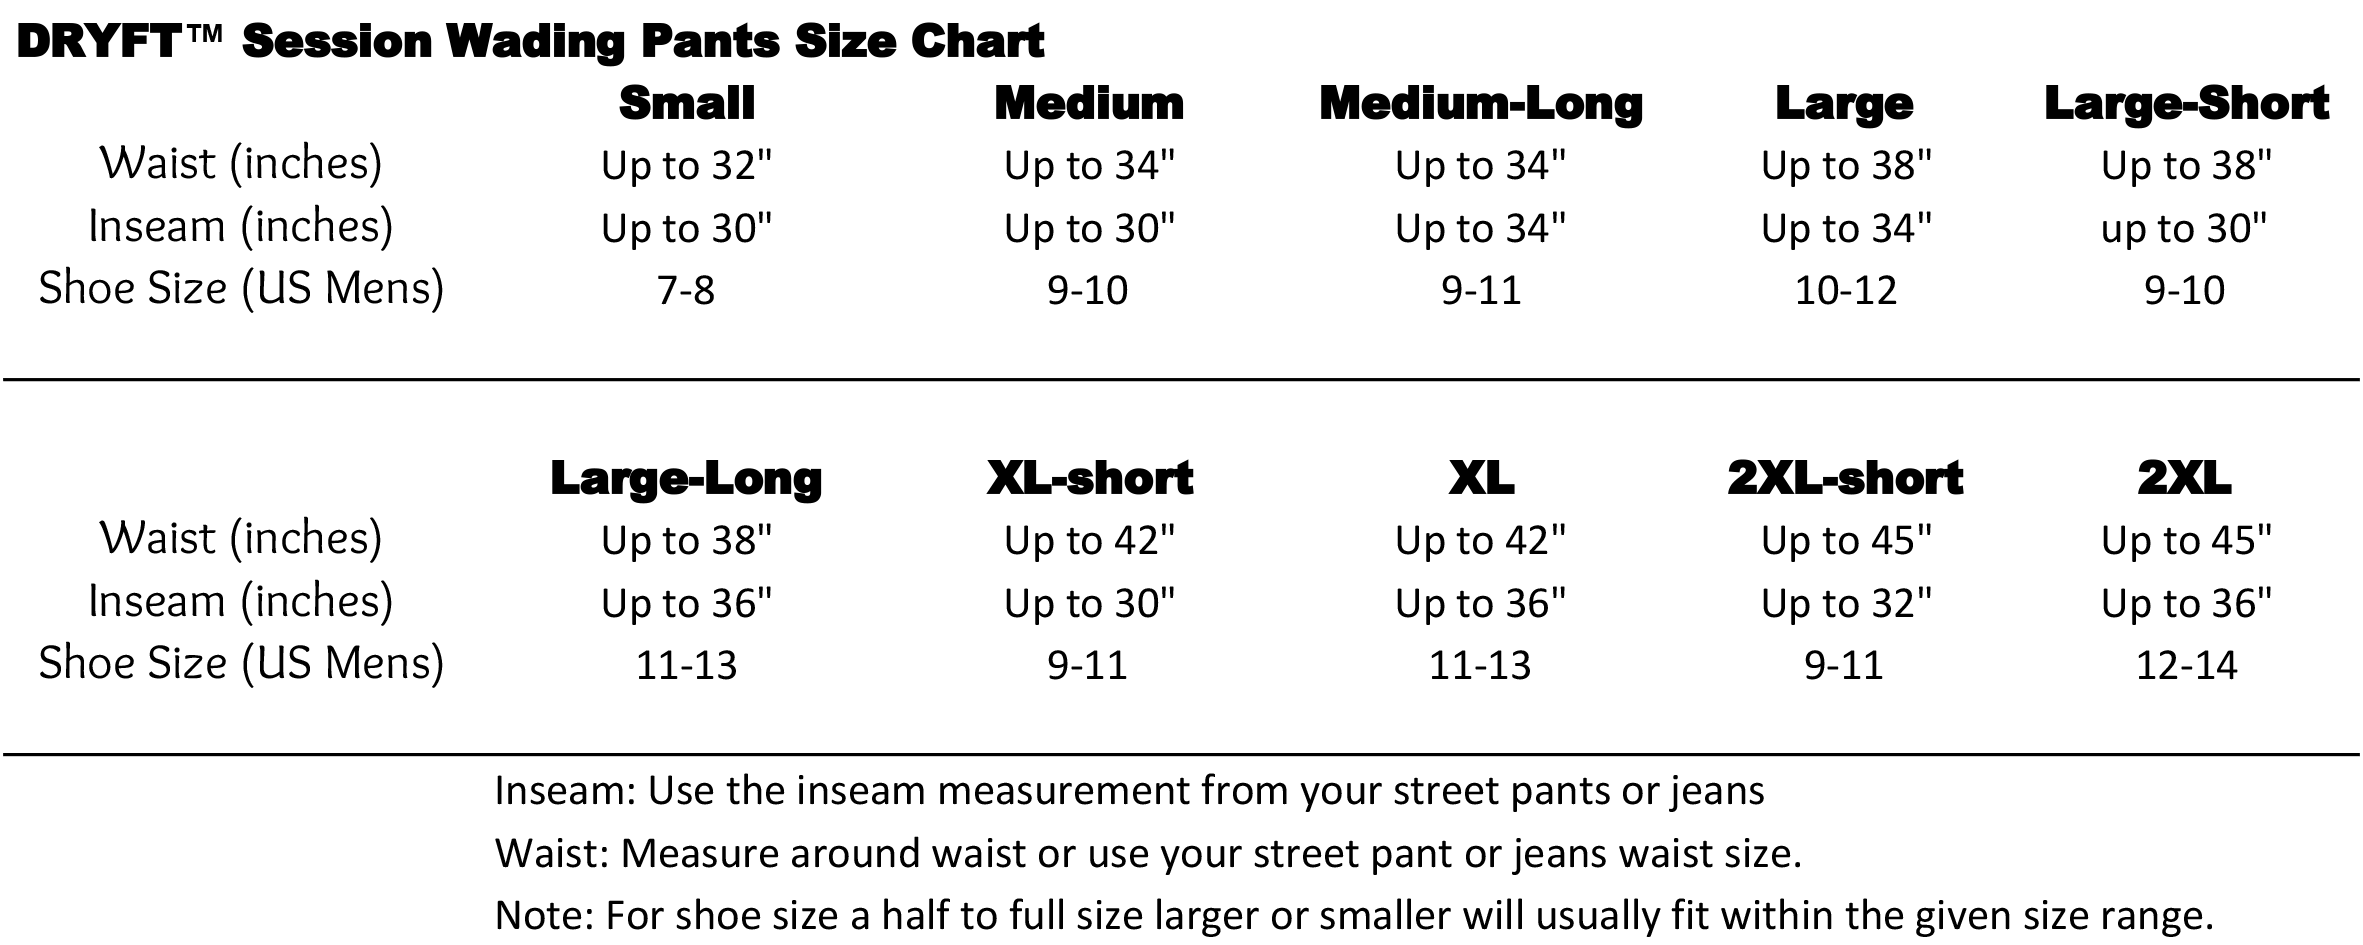 On men's and women's size chart